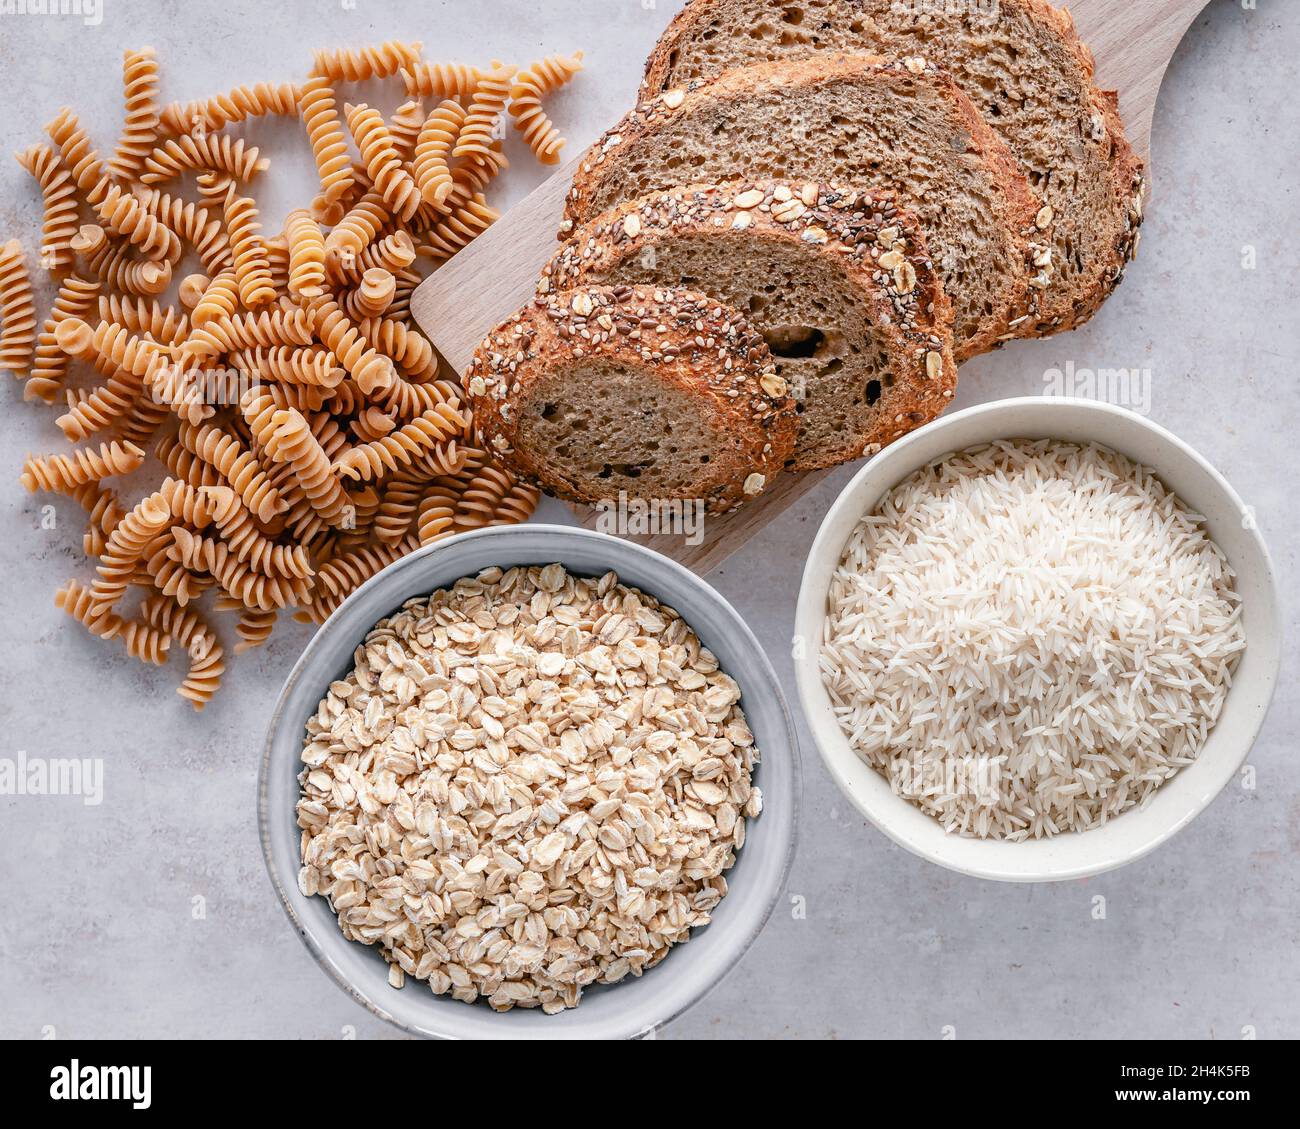 Overhead view of wholegrain pasta, wholegrain sourdough, rolled oats and long grain rice on a table Stock Photo